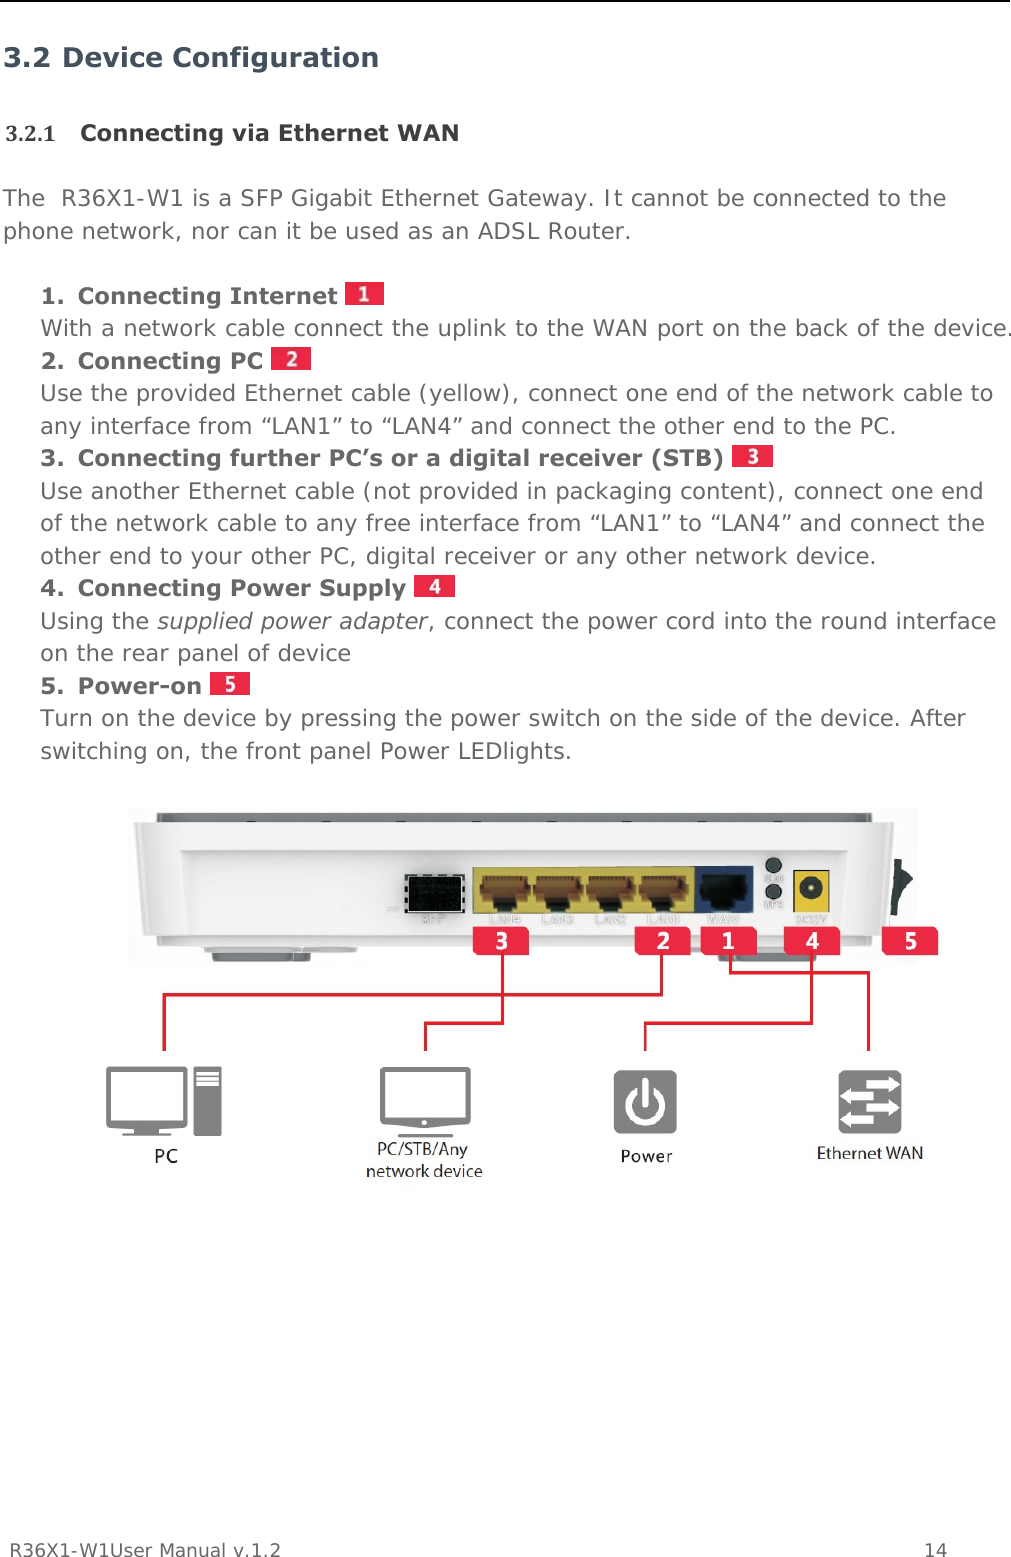           R36X1-W1User Manual v.1.2    14  3.2 Device Configuration 3.2.1 Connecting via Ethernet WANThe  R36X1-W1 is a SFP Gigabit Ethernet Gateway. It cannot be connected to the phone network, nor can it be used as an ADSL Router.  1. Connecting Internet   With a network cable connect the uplink to the WAN port on the back of the device. 2. Connecting PC   Use the provided Ethernet cable (yellow), connect one end of the network cable to any interface from “LAN1” to “LAN4” and connect the other end to the PC. 3. Connecting further PC’s or a digital receiver (STB)   Use another Ethernet cable (not provided in packaging content), connect one end of the network cable to any free interface from “LAN1” to “LAN4” and connect the other end to your other PC, digital receiver or any other network device. 4. Connecting Power Supply   Using the supplied power adapter, connect the power cord into the round interface on the rear panel of device 5. Power-on   Turn on the device by pressing the power switch on the side of the device. After switching on, the front panel Power LEDlights.     